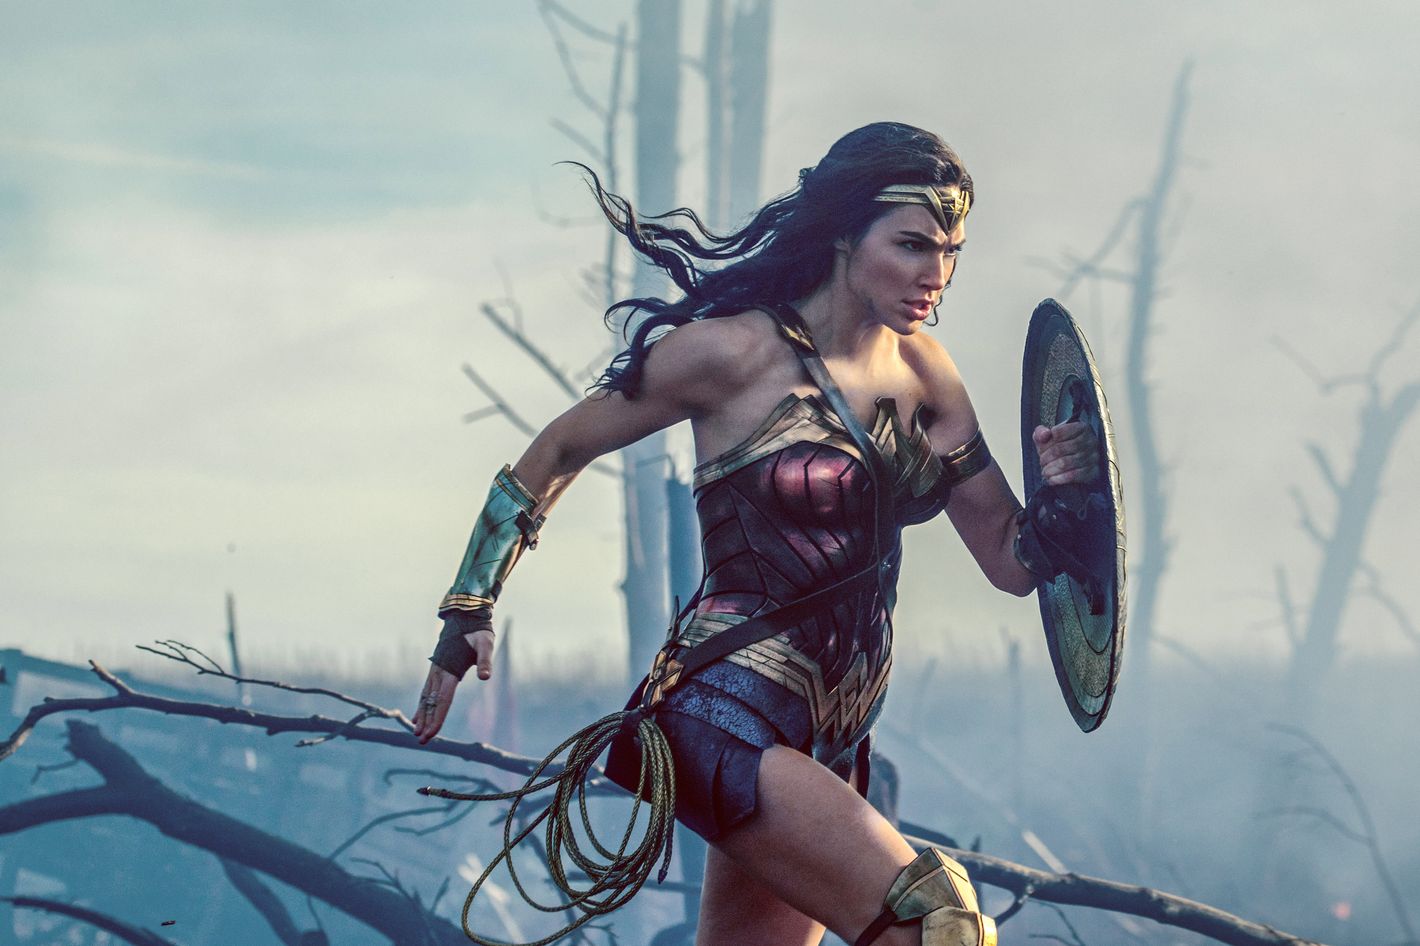 Wonder Woman' Movie Review: A Star Turn for Gal Gadot